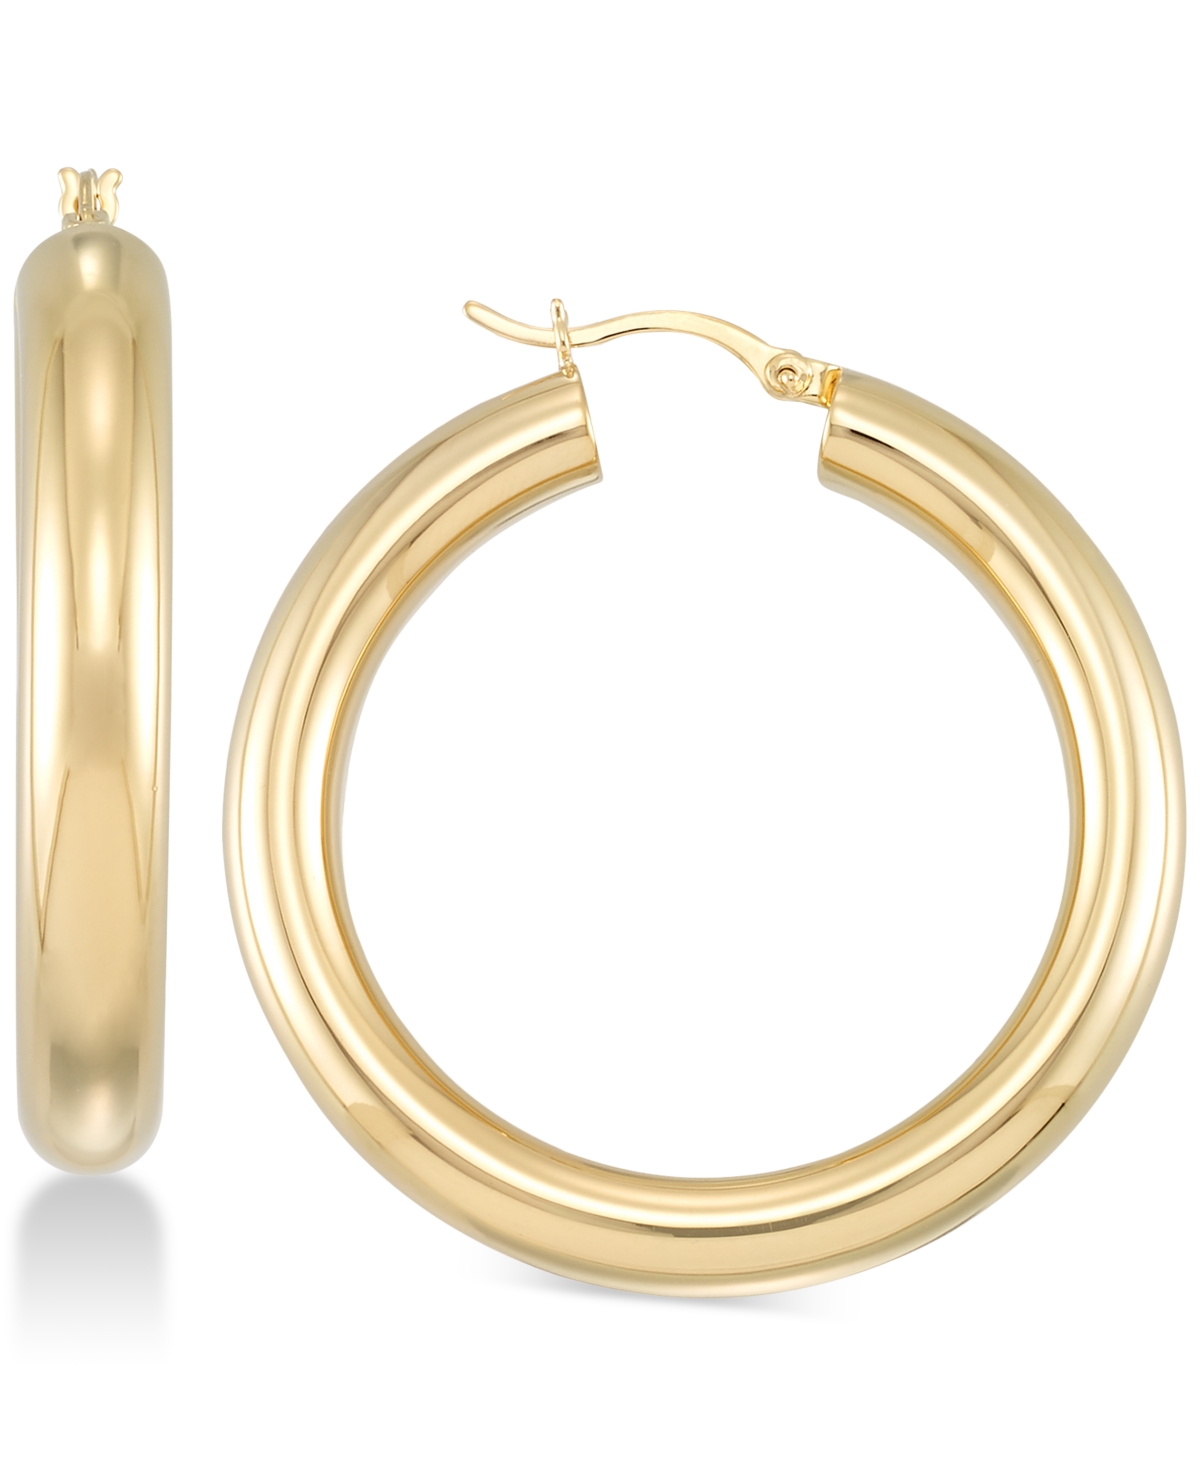 Polished Hoop Earrings in 18k Gold over Sterling Silver - Gold over Silver